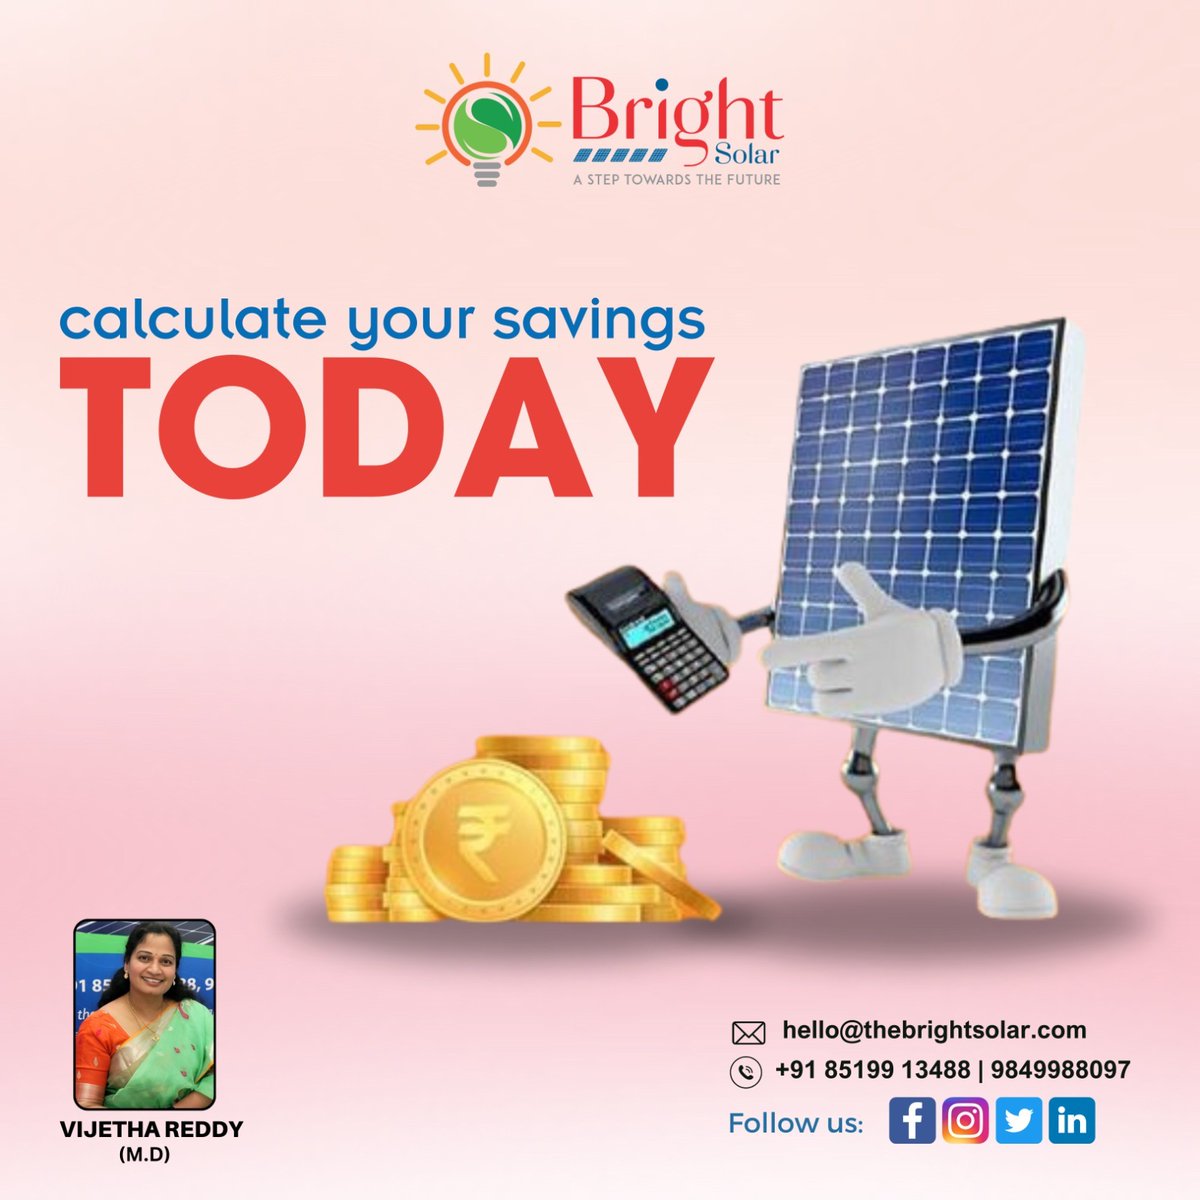 Ready to embrace a greener future and save on energy costs? Bright Solar helps you make the switch to solar power effortlessly! Use our easy savings calculator to see how much you can save by going solar.
#BrightSolar #AffordableSolar #SolarSolutions #solarcompany #solarpannel